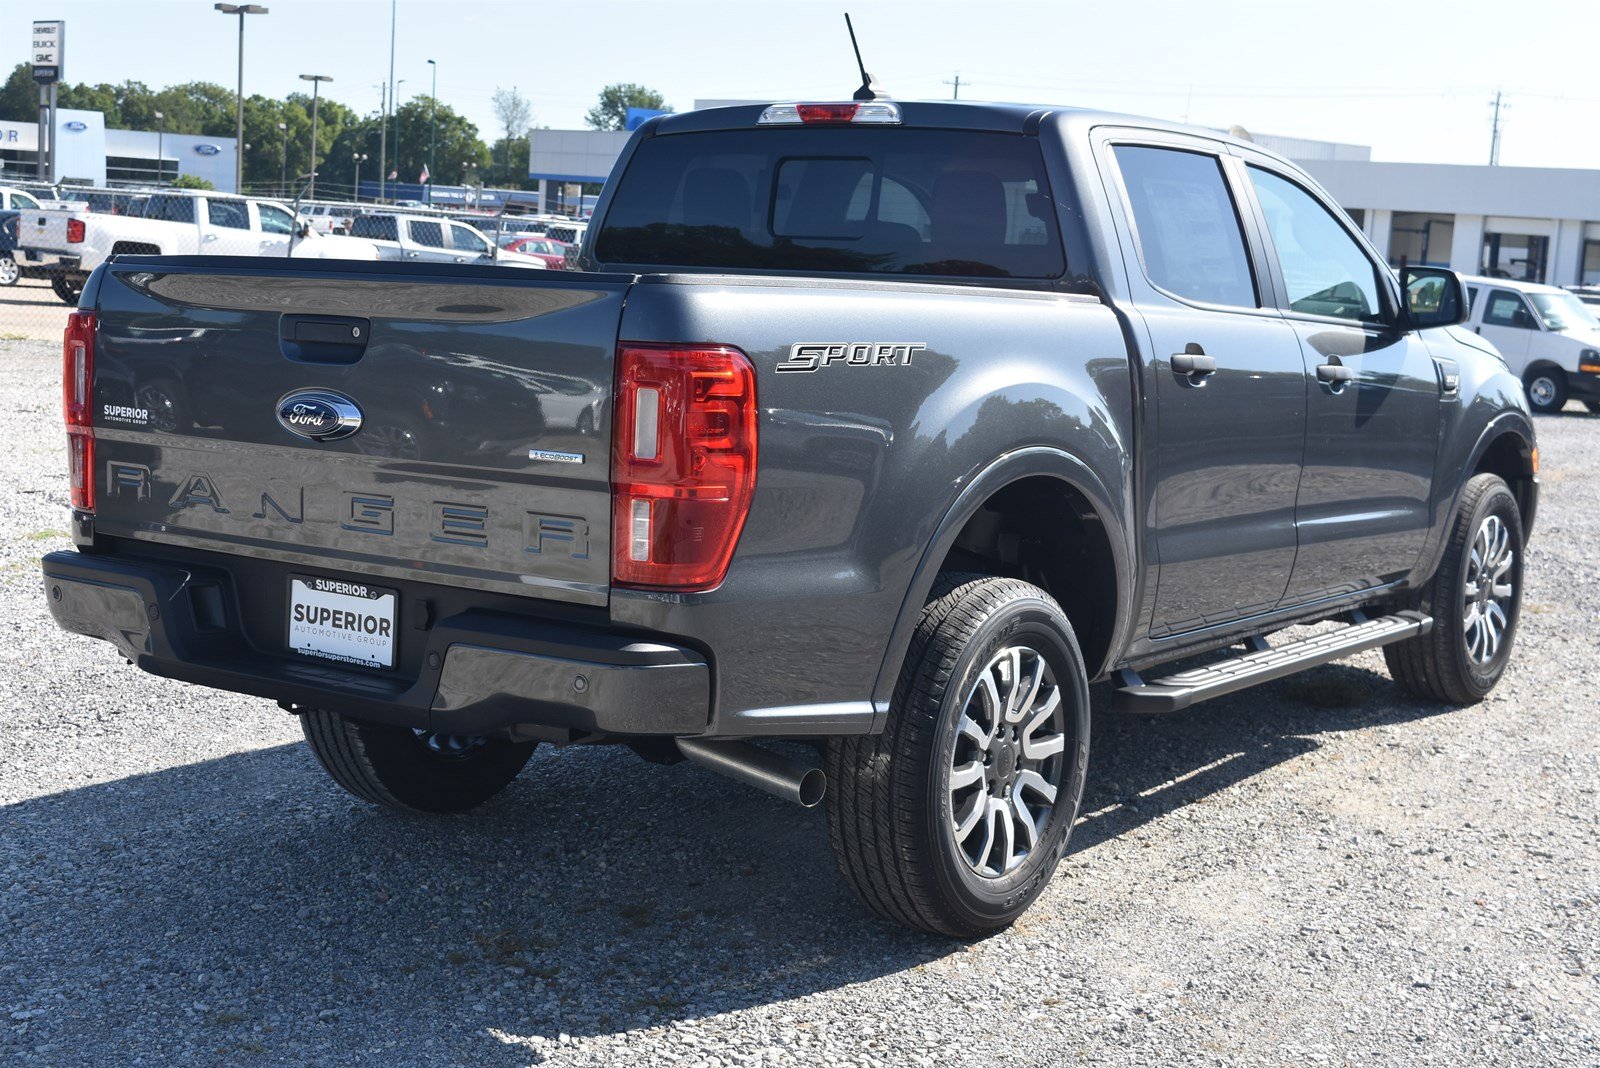 New 2019 Ford Ranger Xlt Crew Cab With Navigation